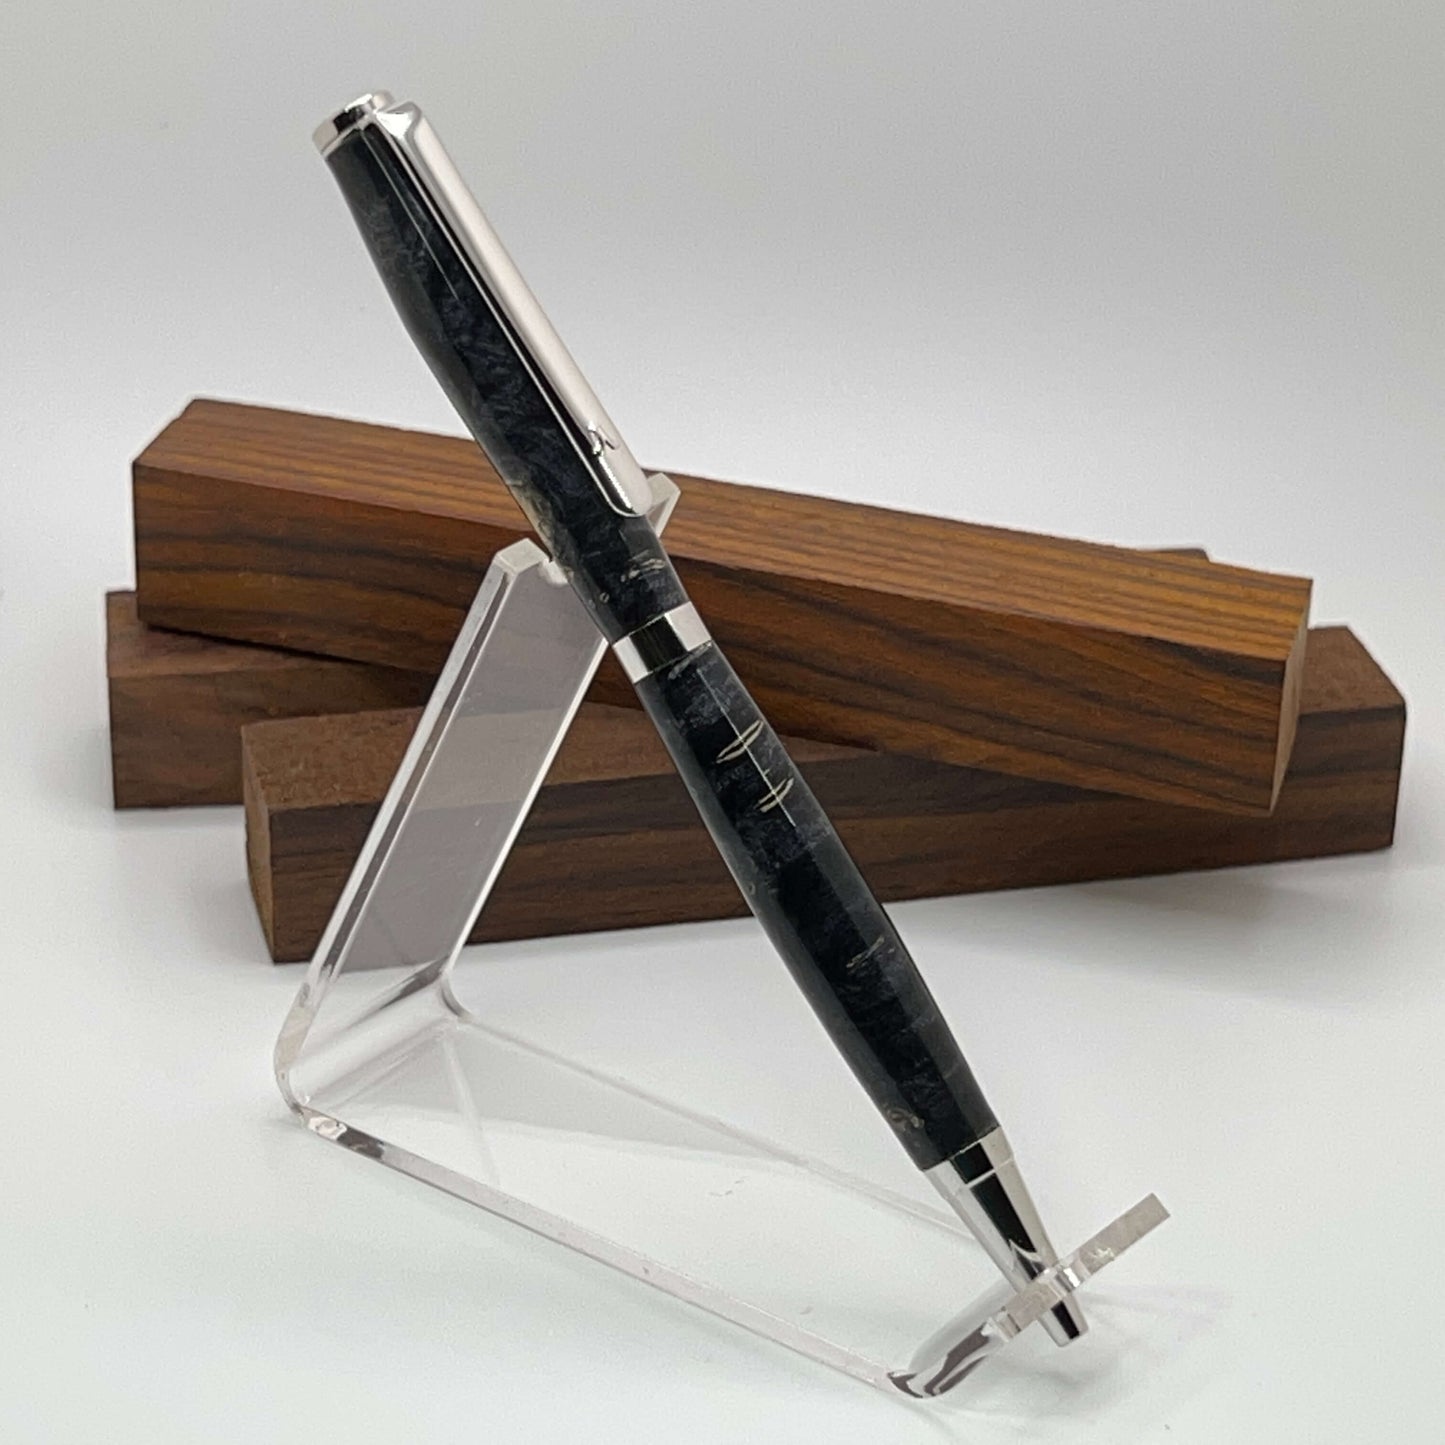 Handcrafted pen with Box Elder Burl wood dyed black and rhodium hardware